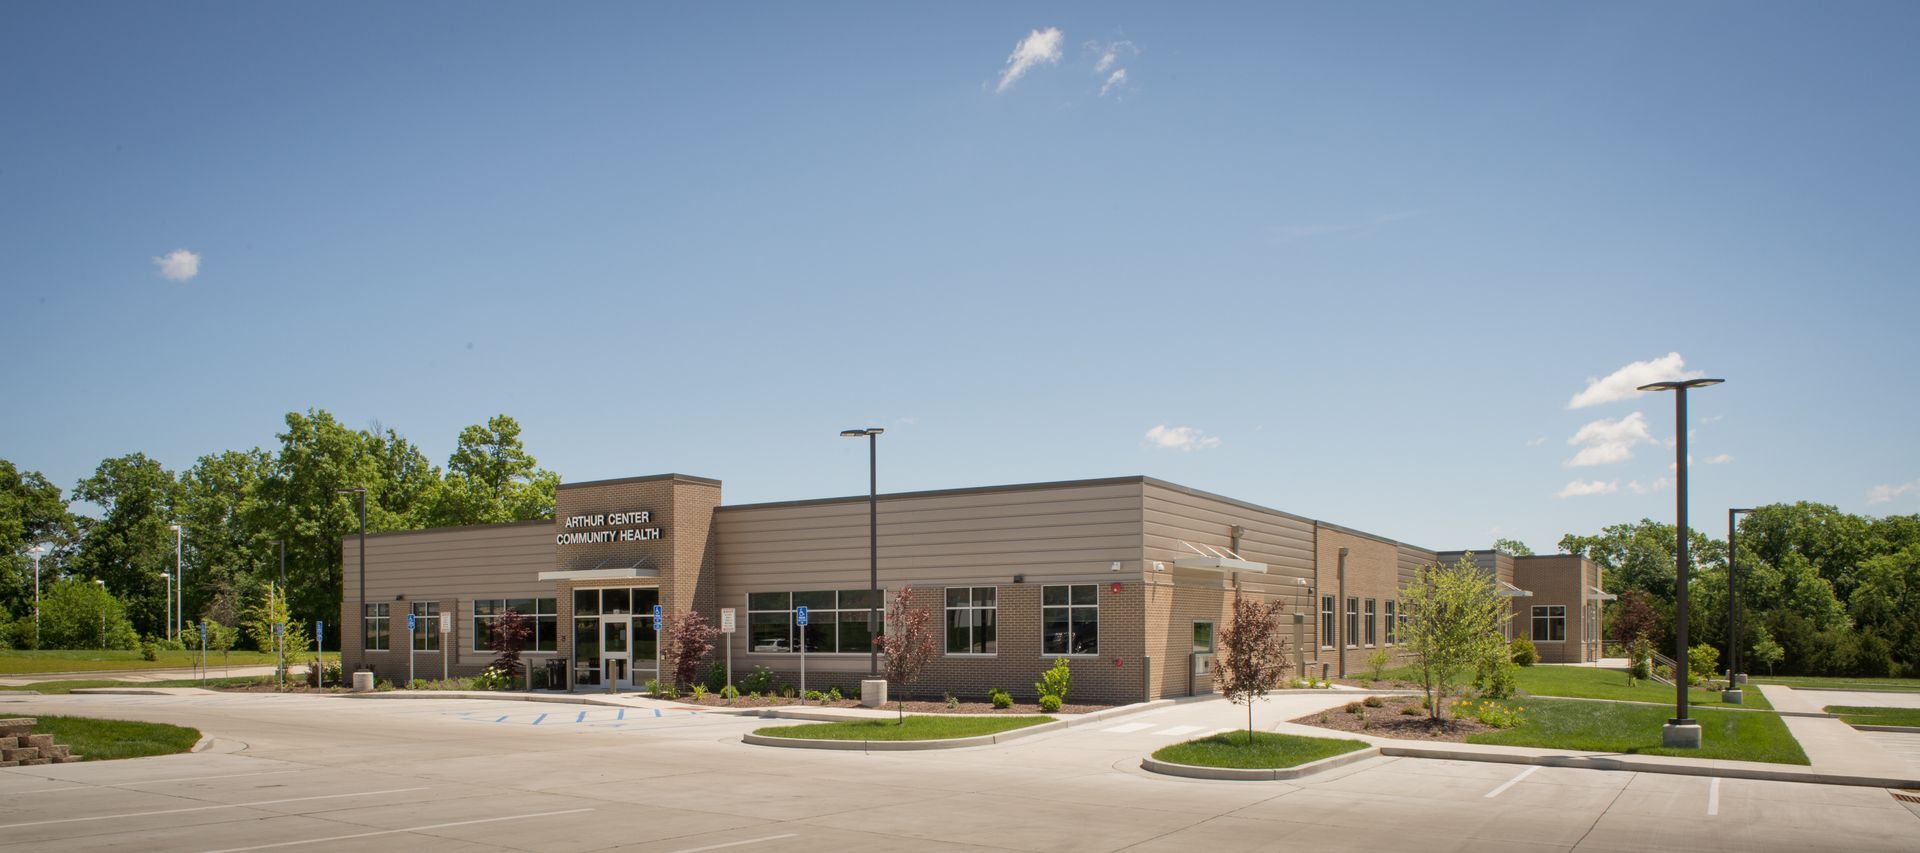 Professional Contractors & Engineers Builds Attractive Offices in Marshall, MO.